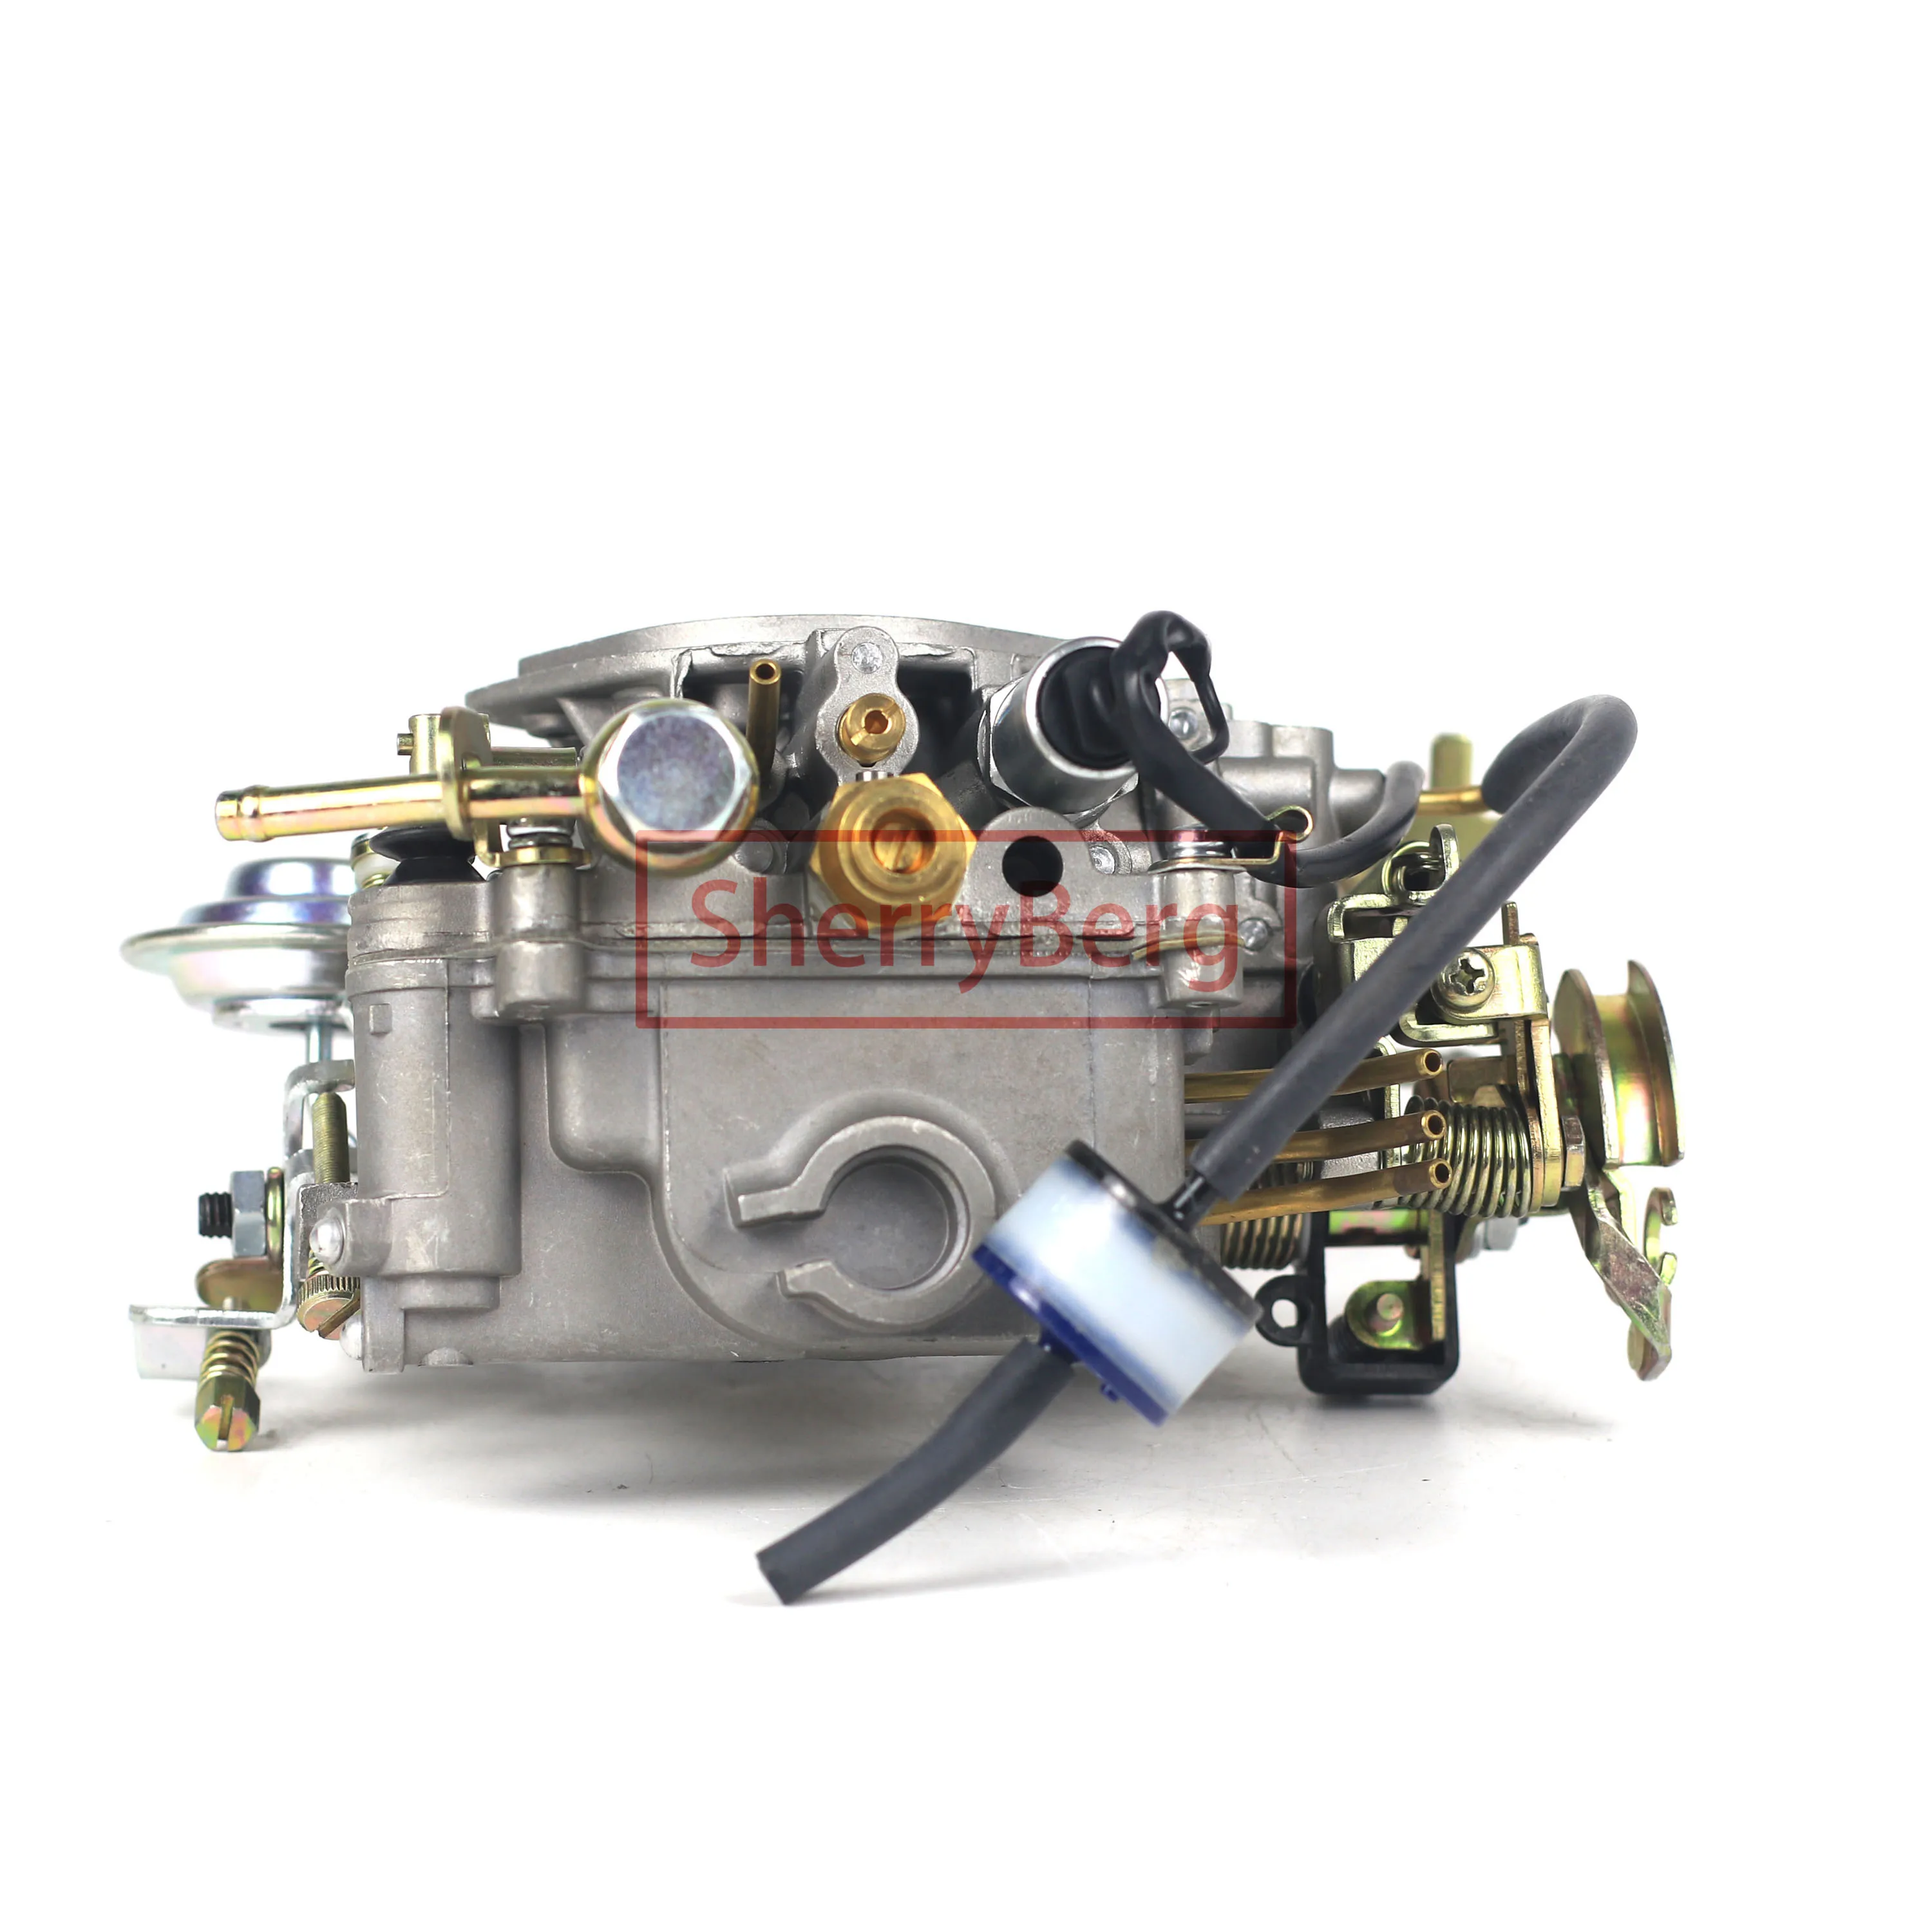 

SherryBerg Brand New replace Carburetor carb carby for Proton WIRA part number MD-192037 carburettor vergaser free shipping